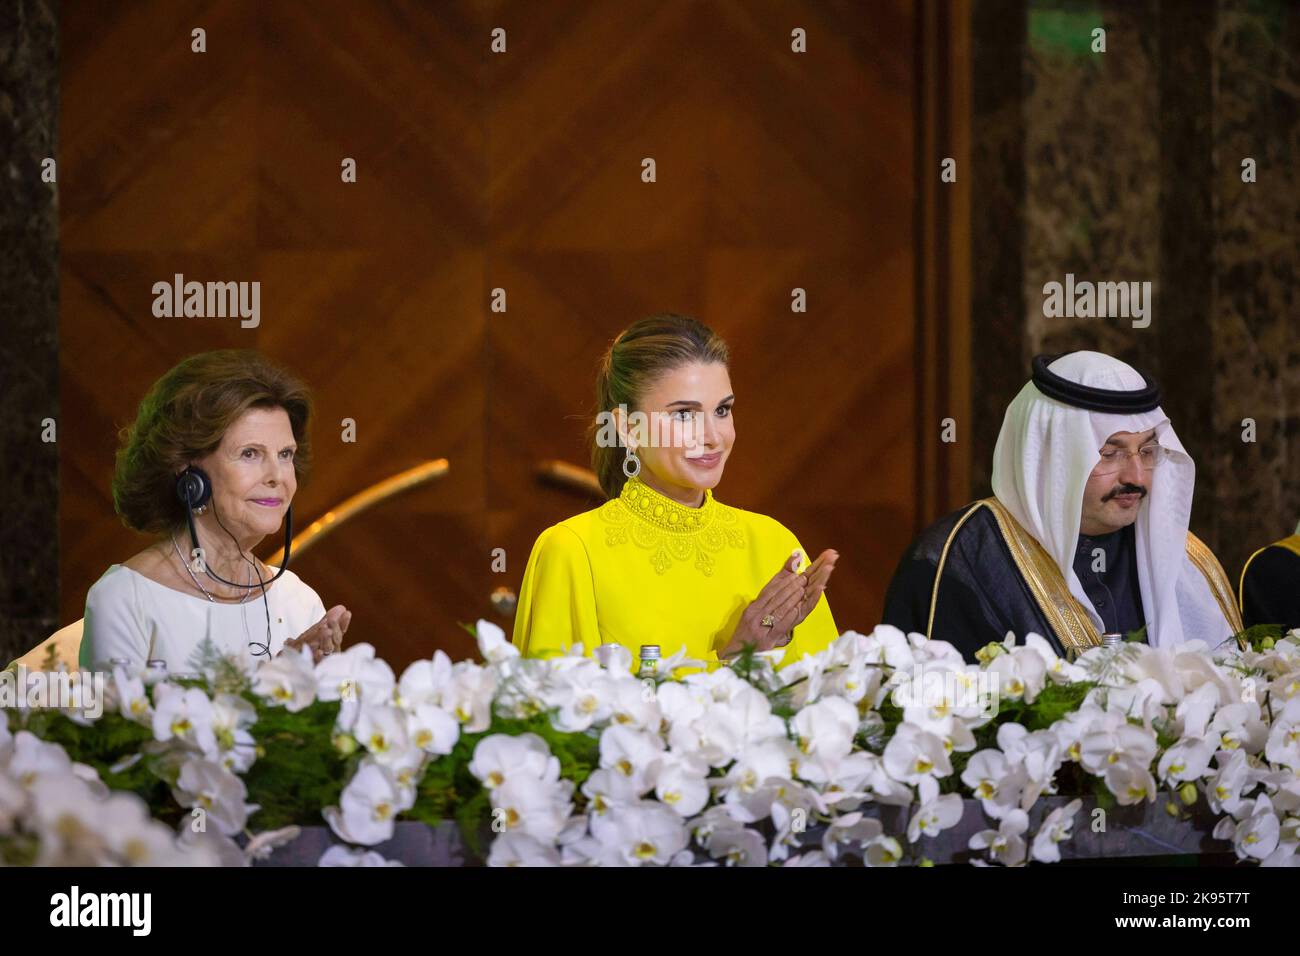 AMMAN 20221025Queen Silvia and Queen Rania Al-Abdullah of Jordan at the Mentor Arabia gala dinner in Amman, Jordan. On the right, Prince Turki bin Talal bin Abdulaziz, Chairman Mentor Arabia Photo: Royal Hashemite Court / Handout / code 10501 **MANDATORY BYLINE: Royal Hashemite Court / Handout ** **For editorial use only. The image comes from an external source and is distributed in its original form as a service to our subscribers** Stock Photo